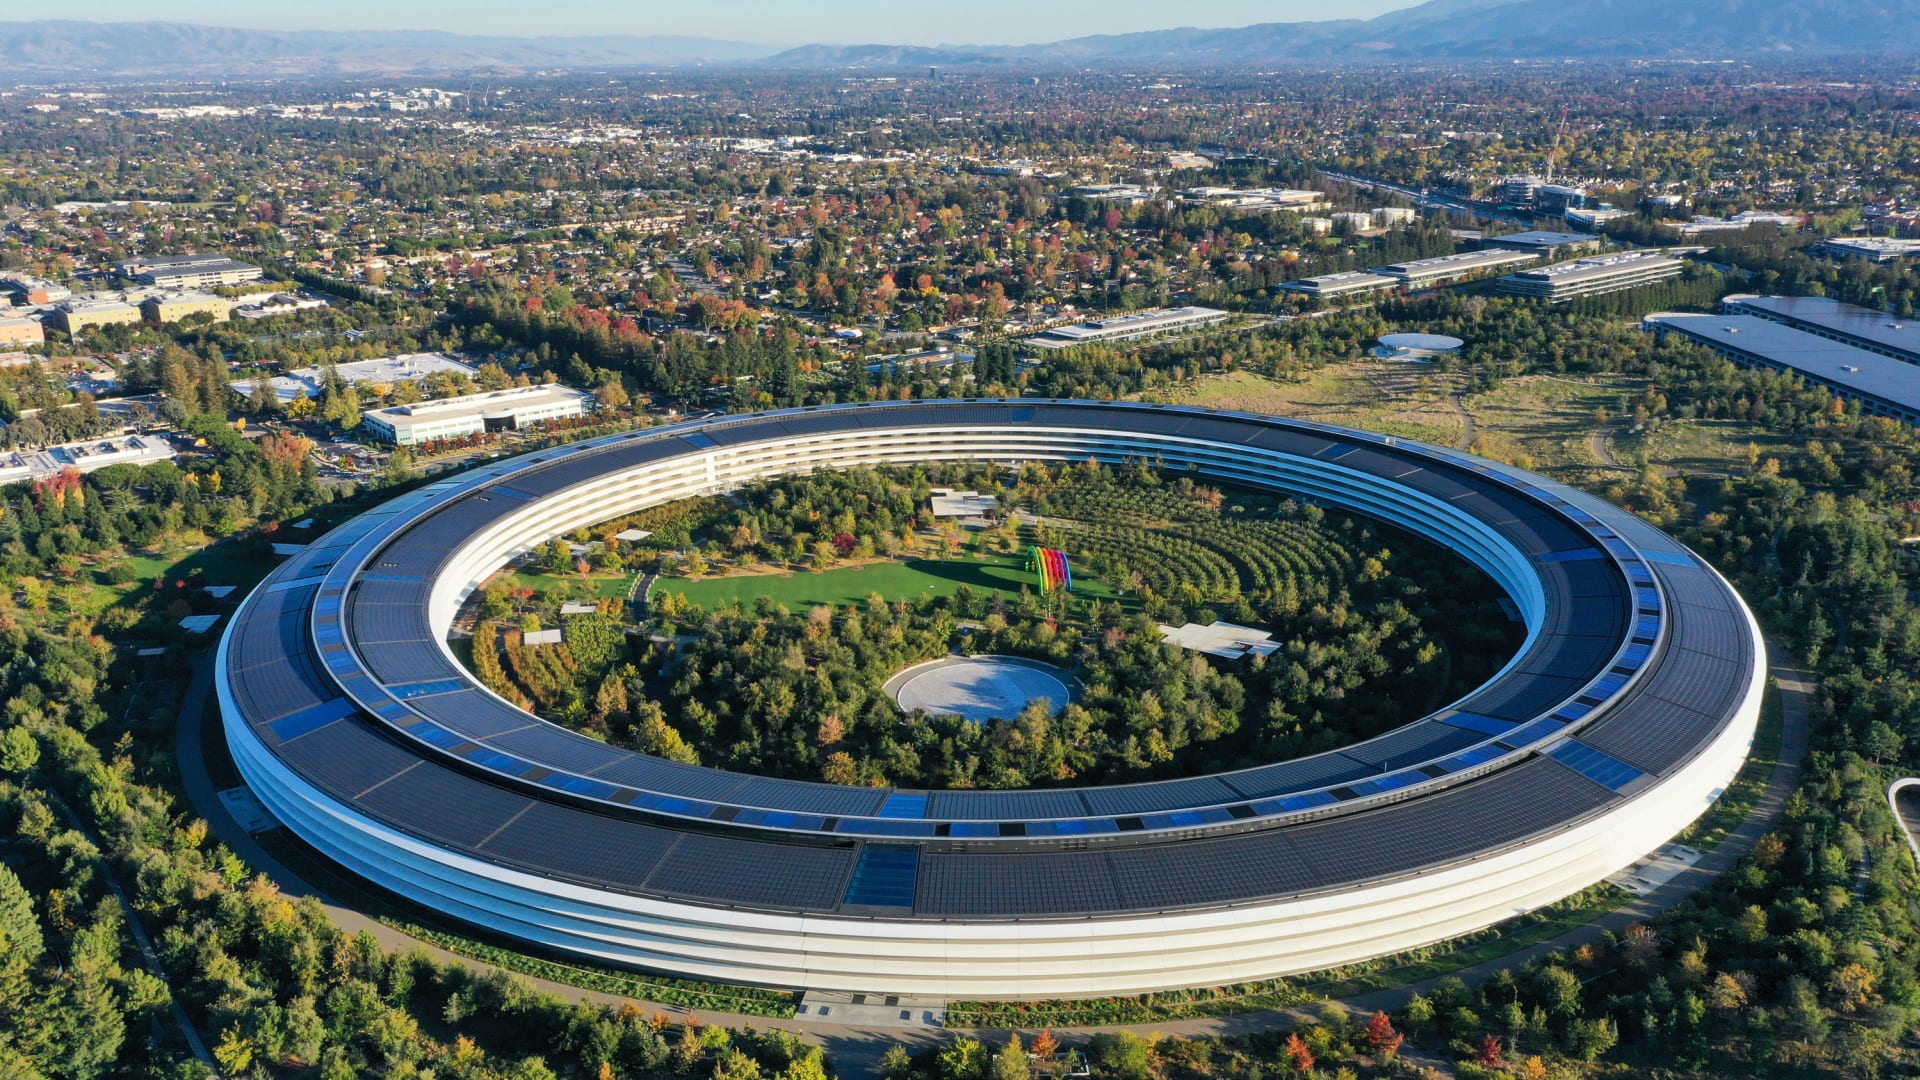 An aerial view of Apple Park in Cupertino, California.